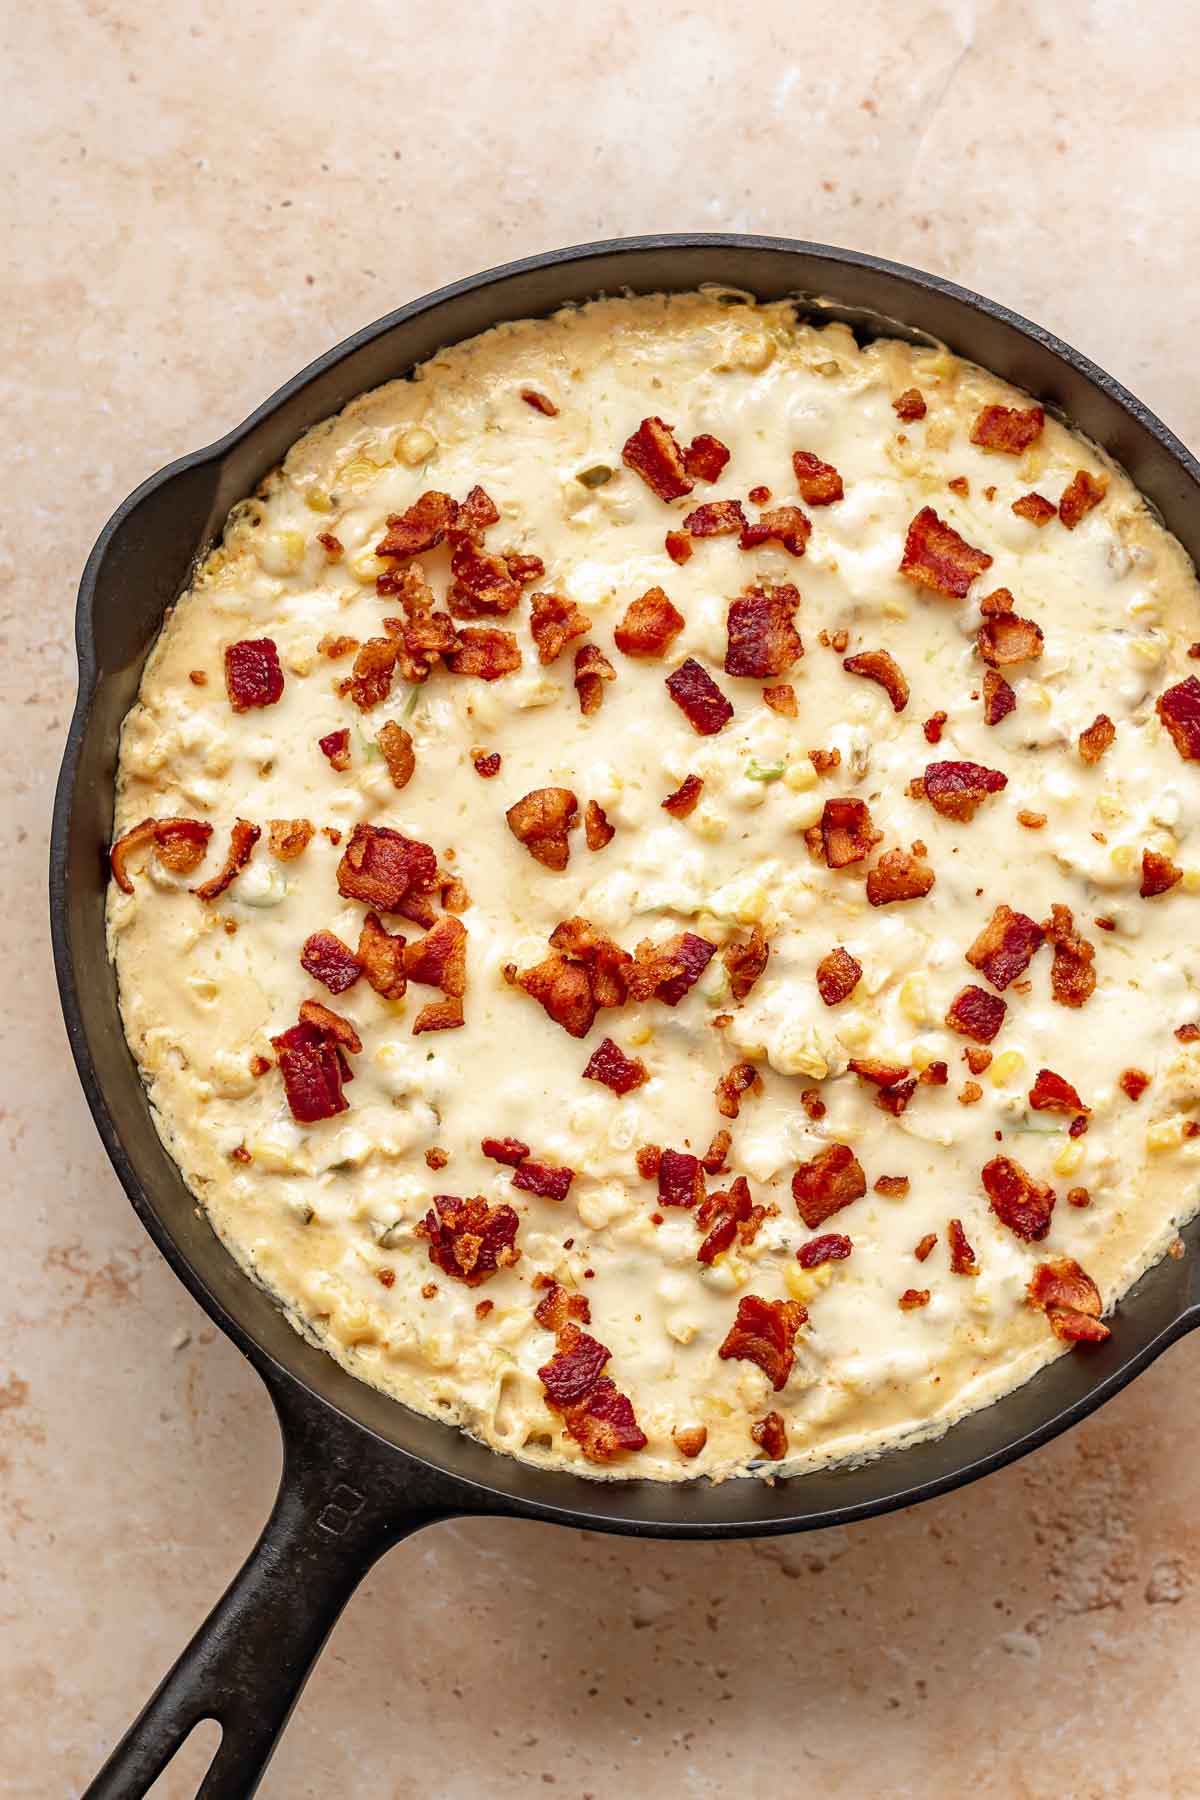 Hot corn dip in a skillet with melted cheese and cooked bacon pieces on the top.